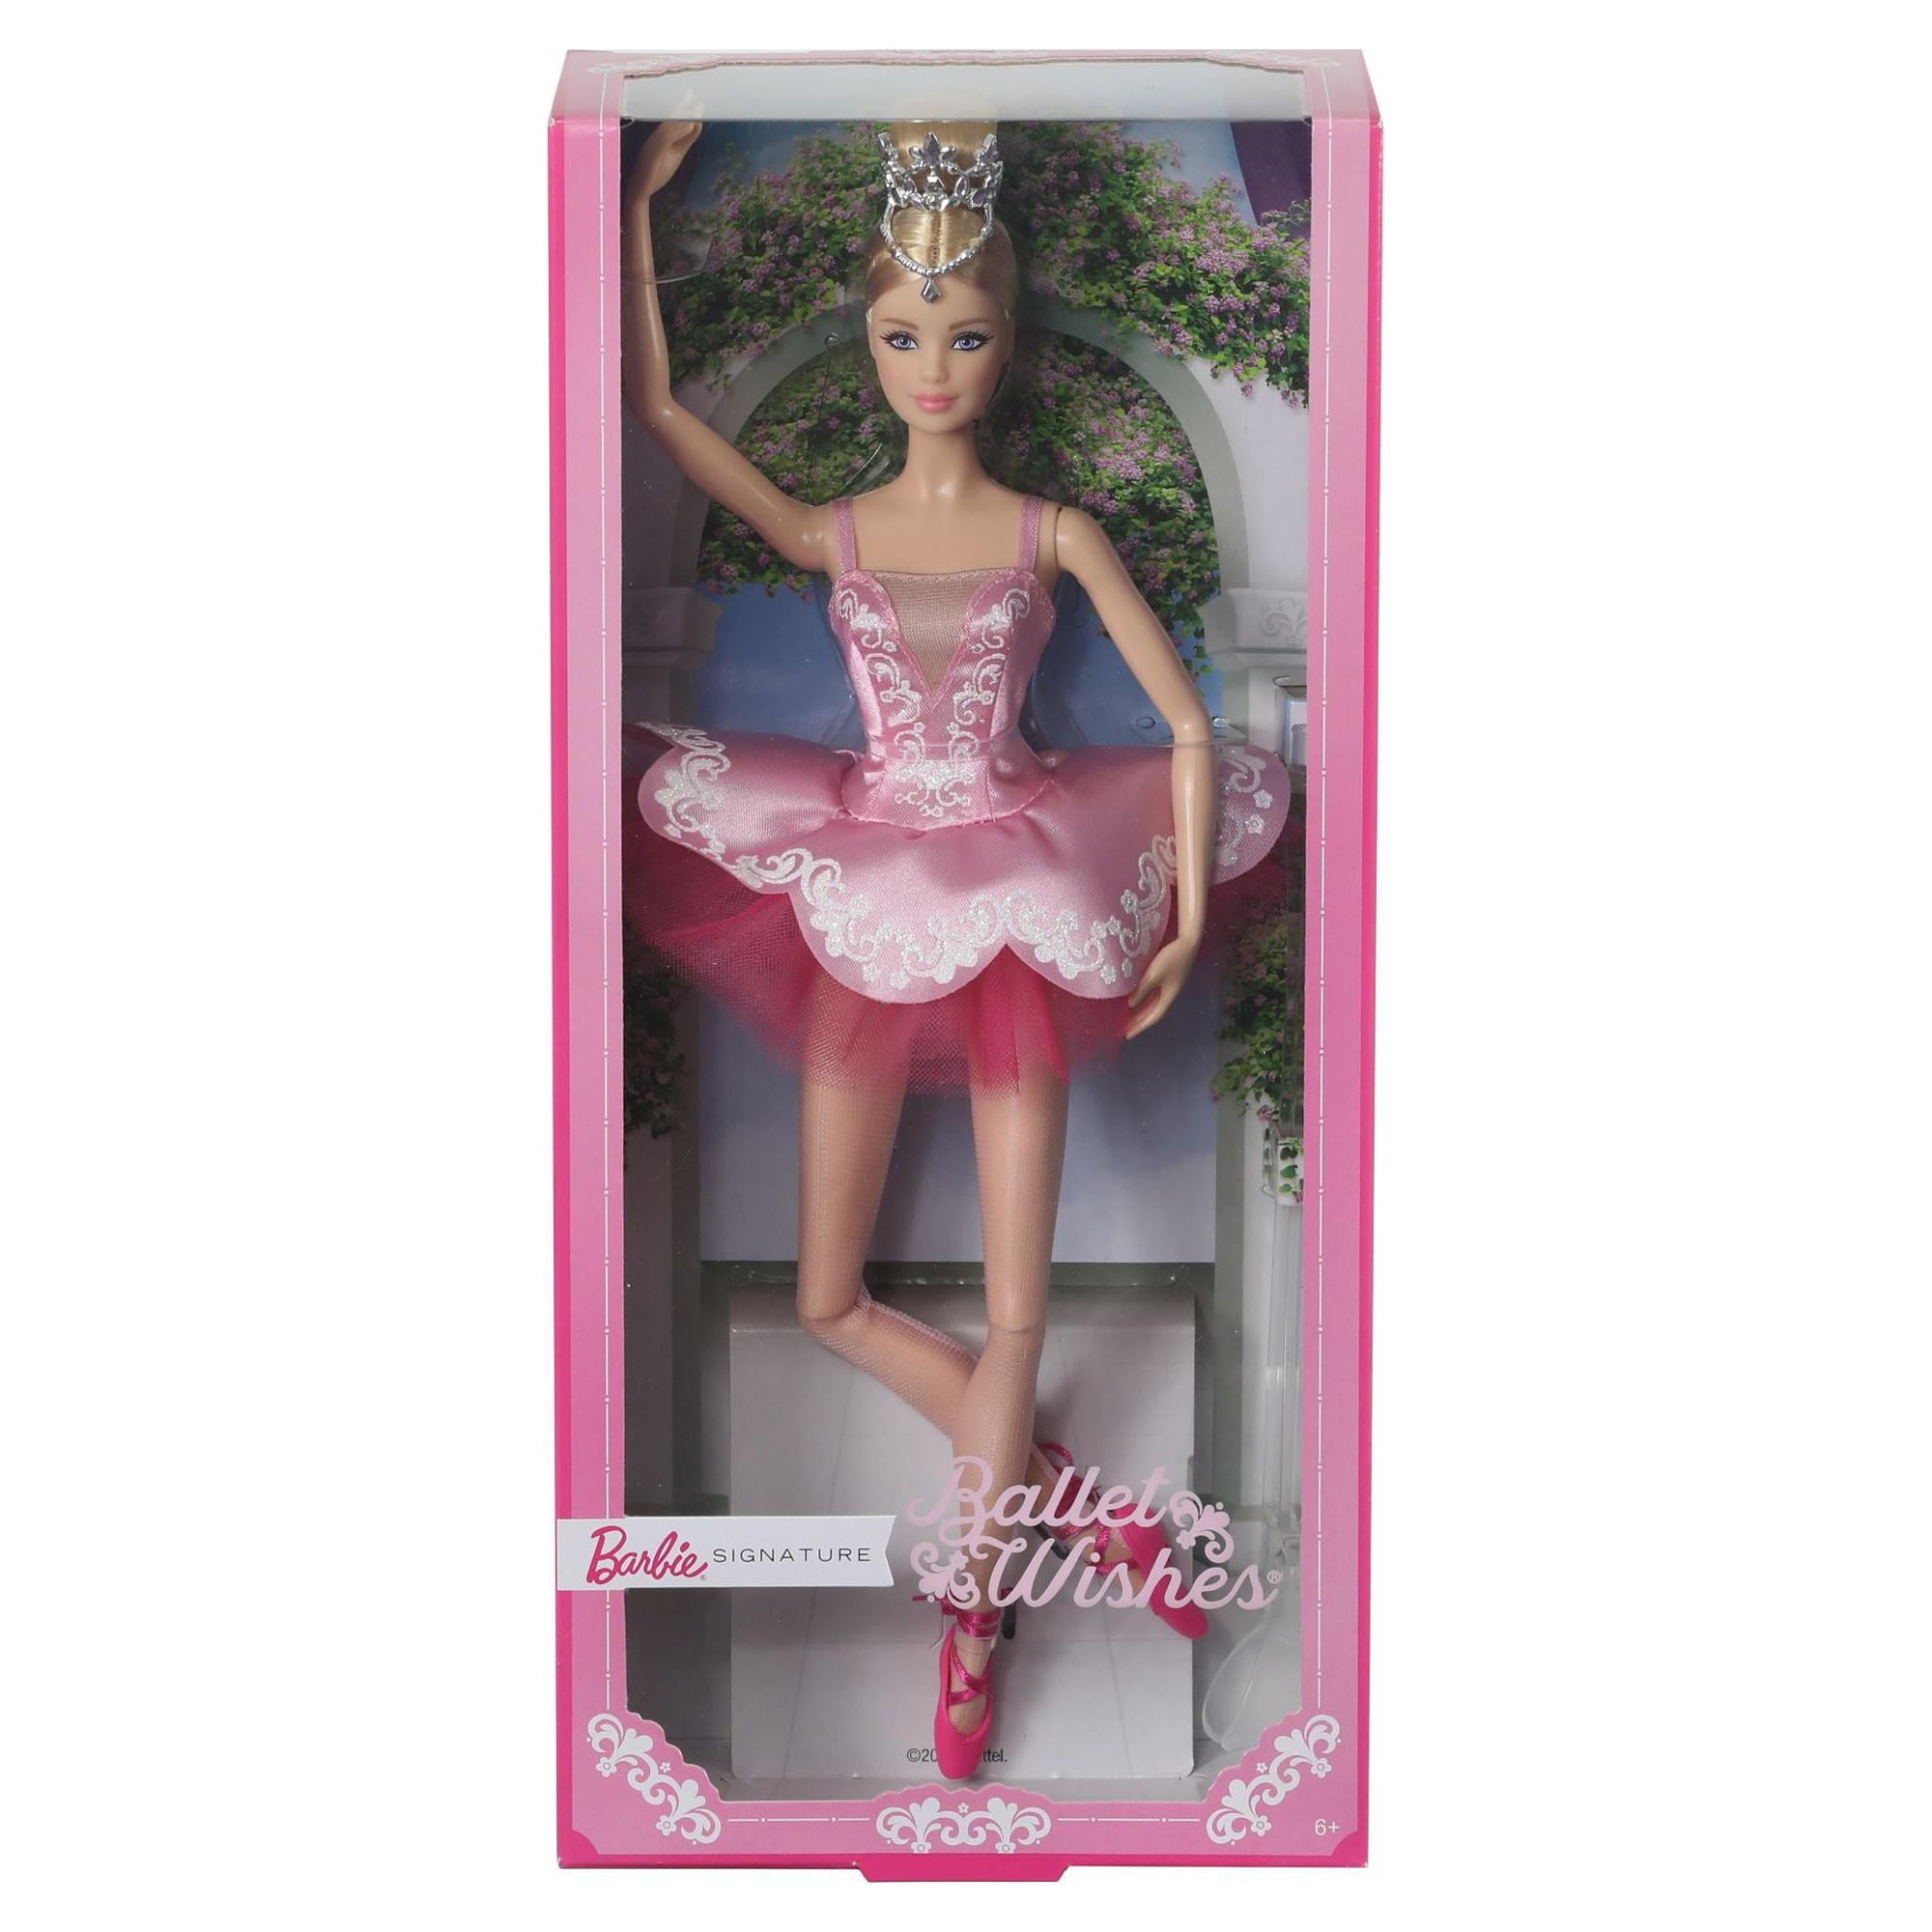 Wishes Tiara, 12-In Year Shoes Doll, And Wearing Tutu, Signature Olds Pointe Barbie 6 Up And Ballet for Approx.